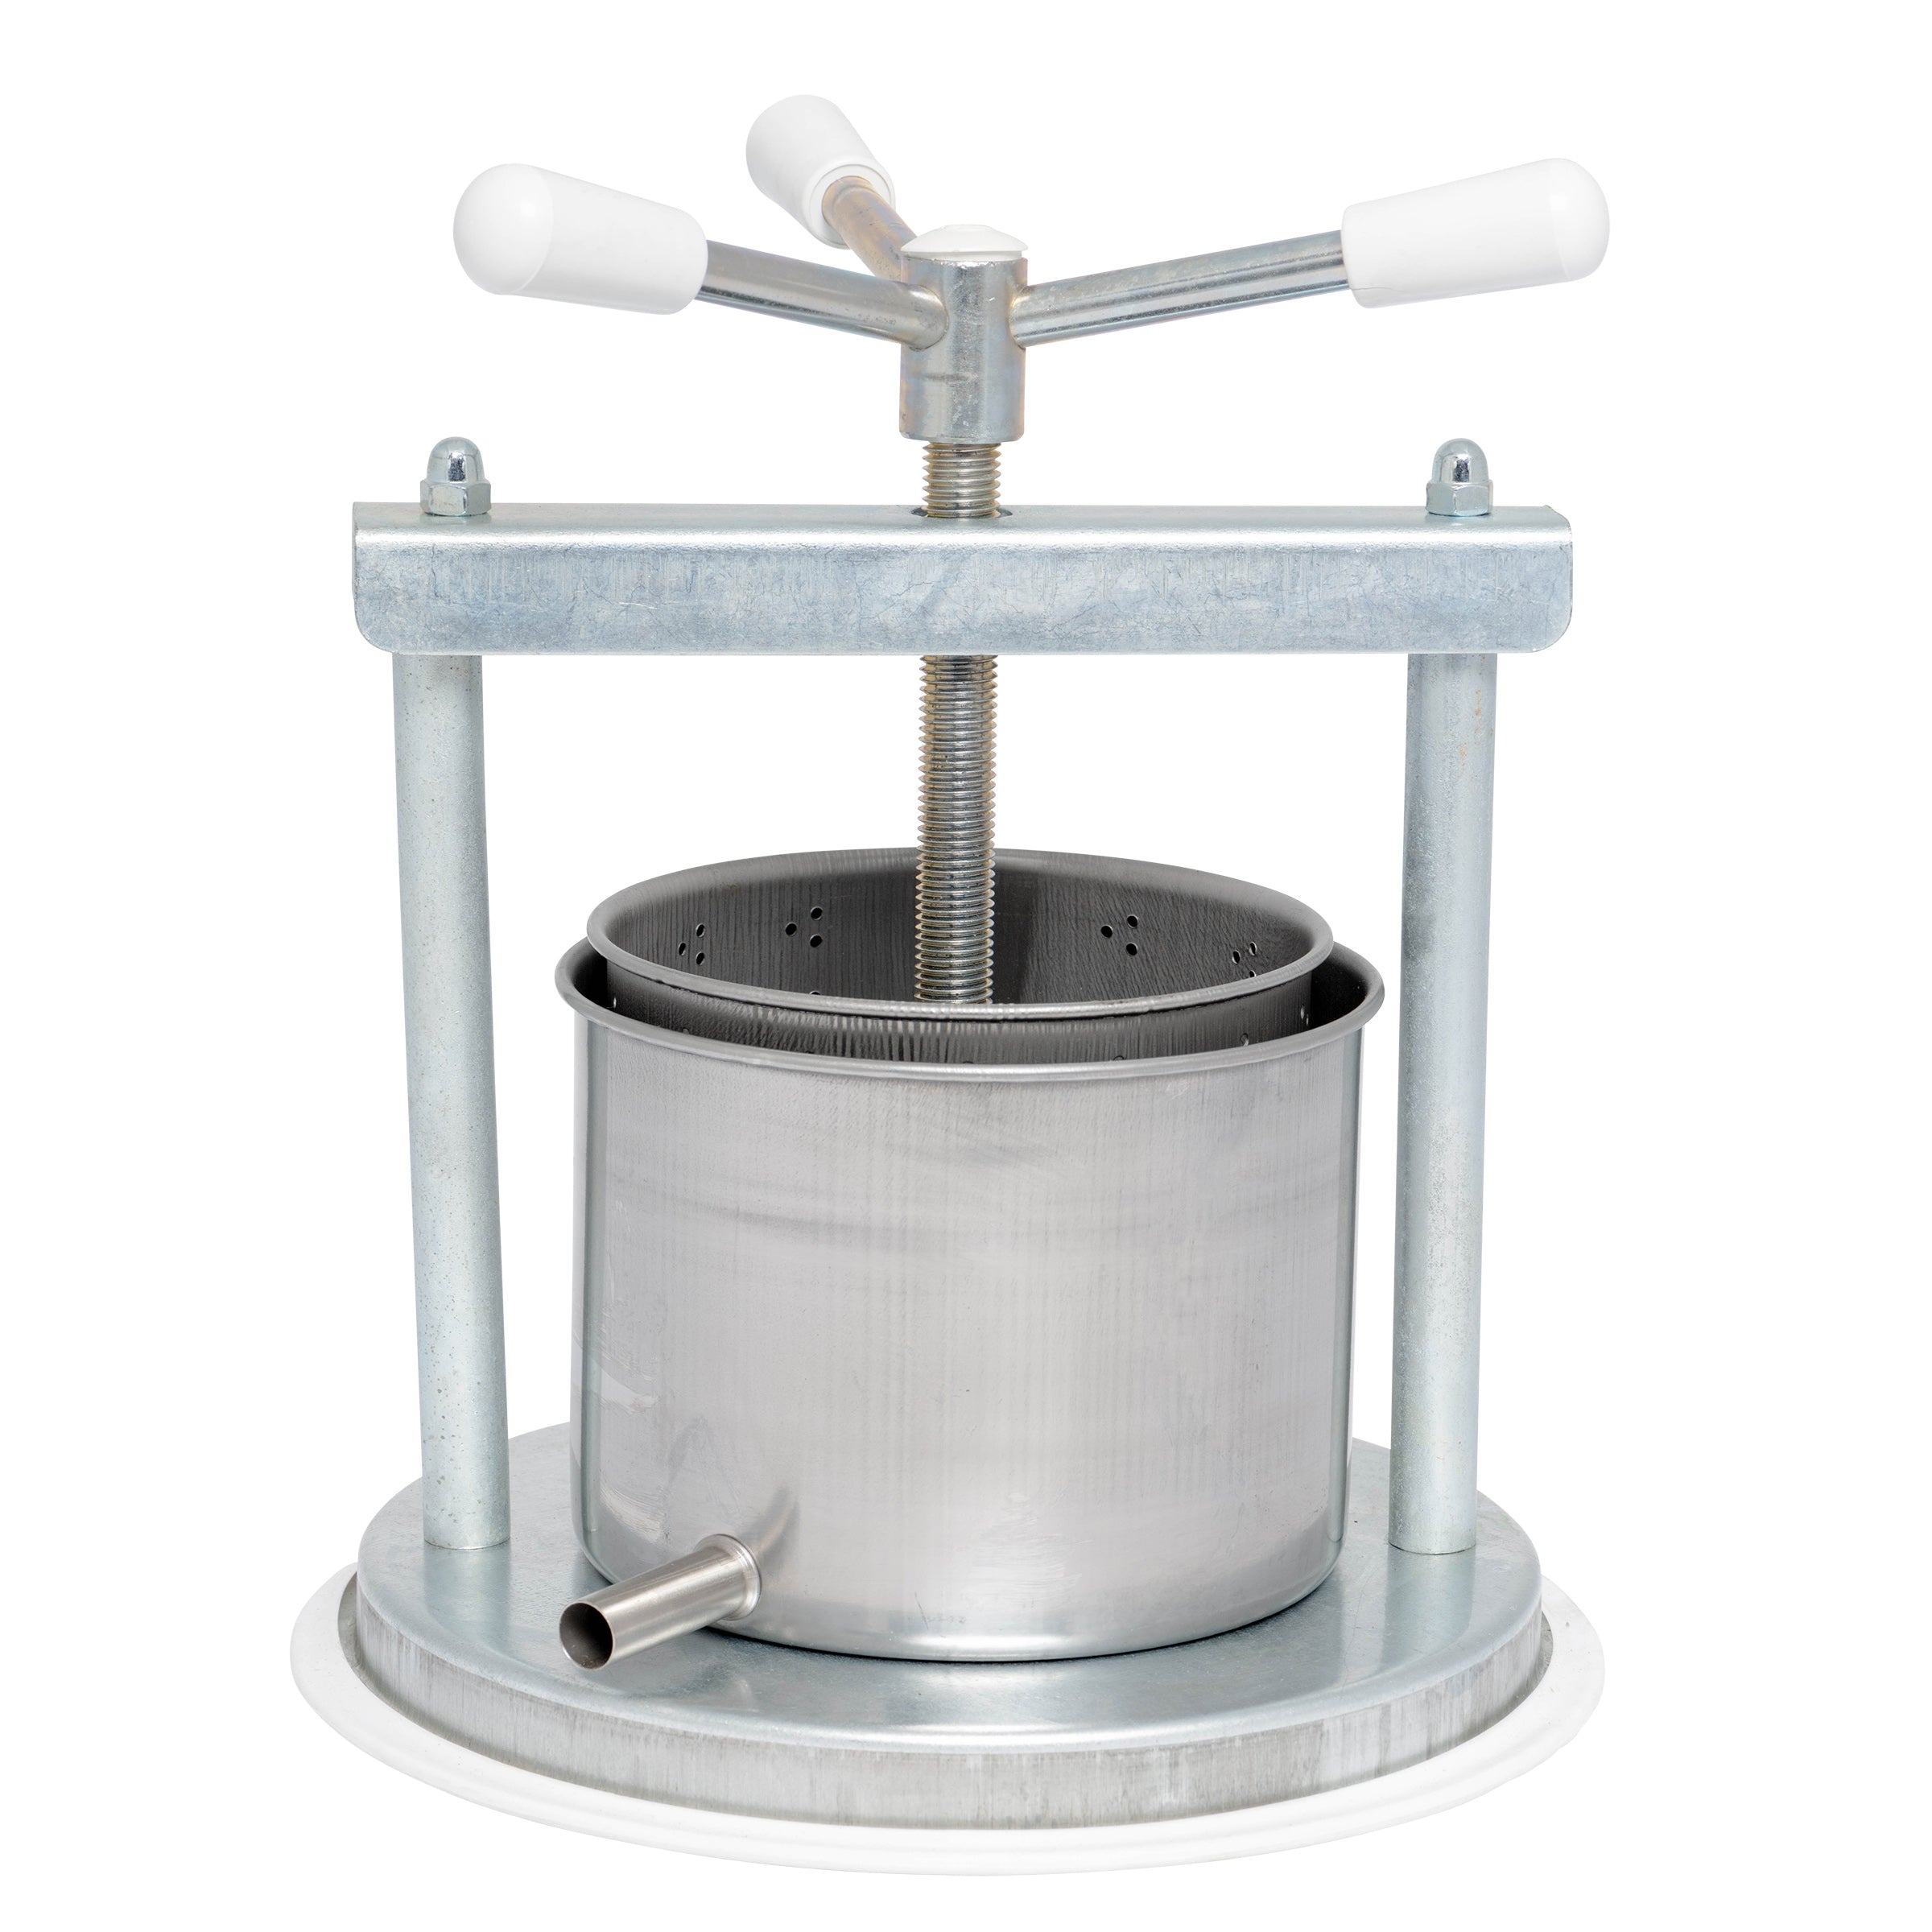 Medium Professional Galvanized Vegetable / Fruit Press 6" - 2.5 Litre Torchietto - Made in Italy for Pressing Fruits, Vegetables, Berries and Tinctures USA